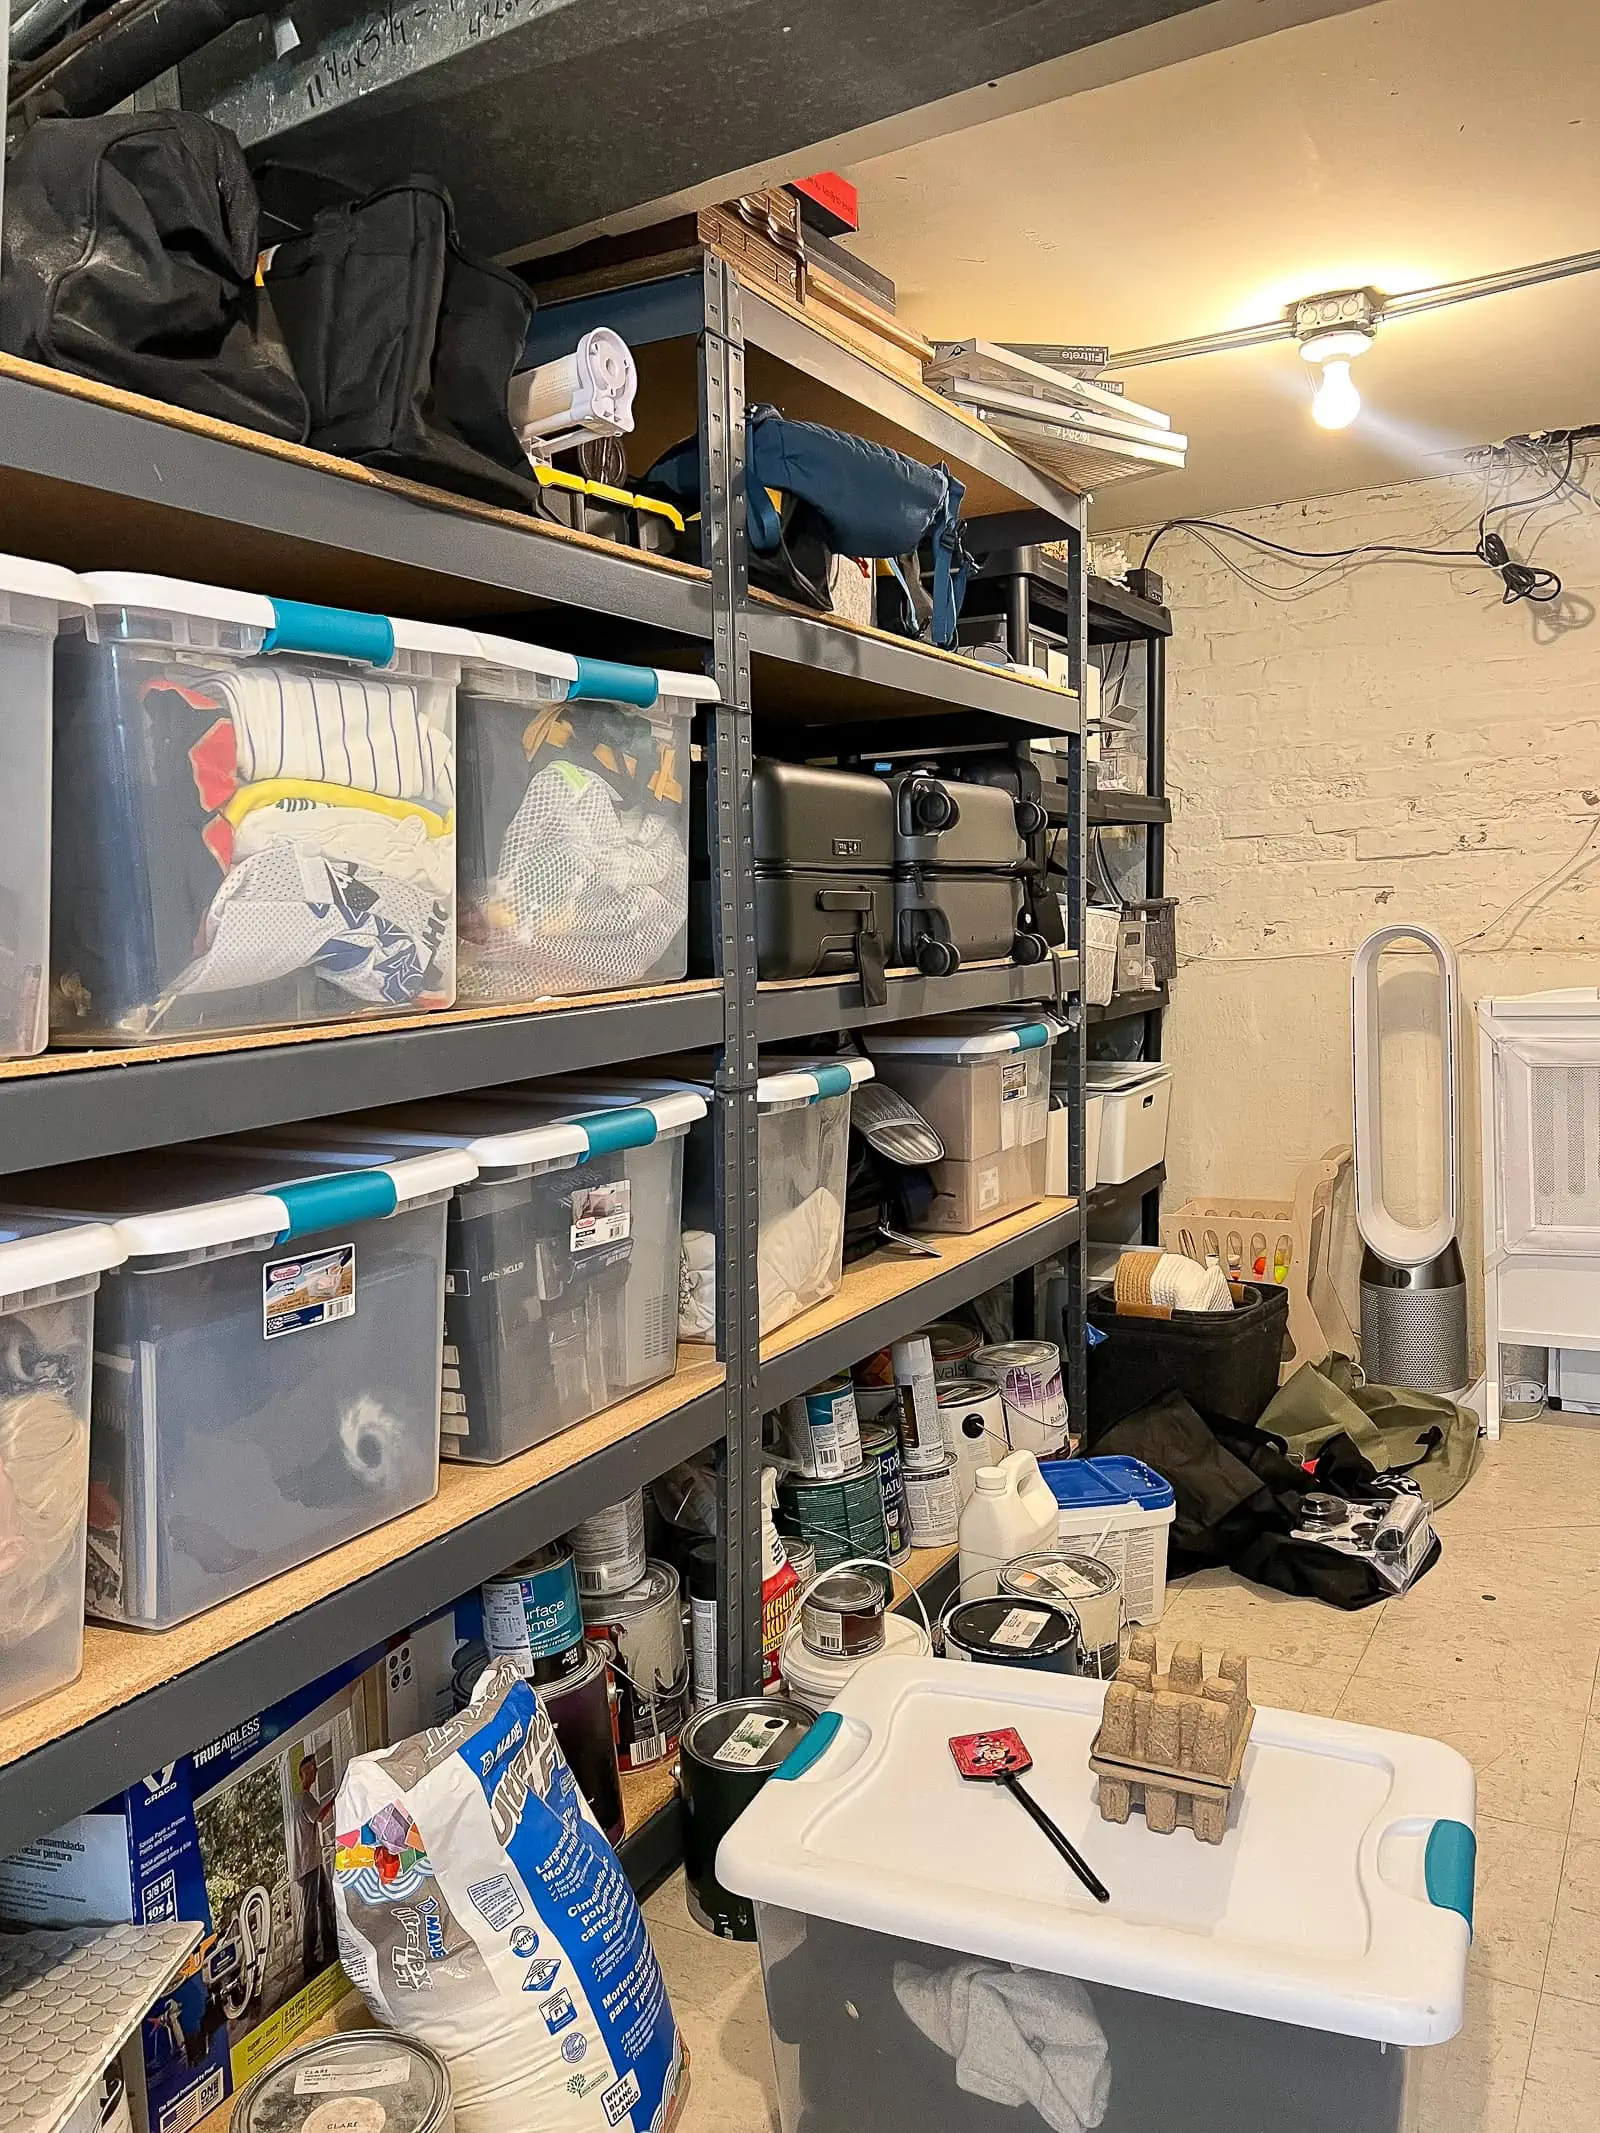 Our messy storage room